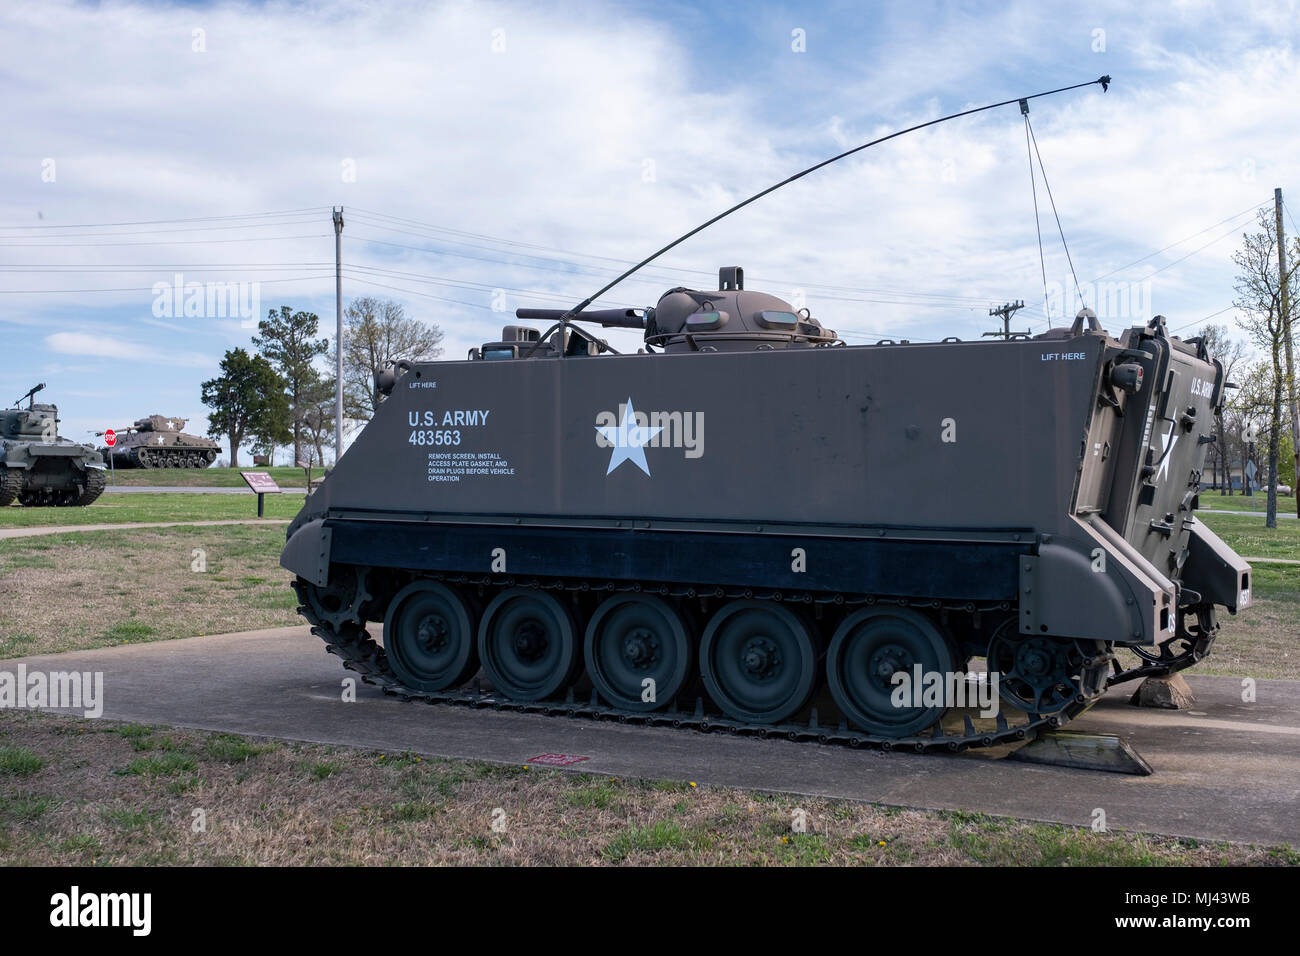 Armored Personnel Carrier. An outdoor military vehicle complex featuring vehicles used throughout military history eras. Stock Photo